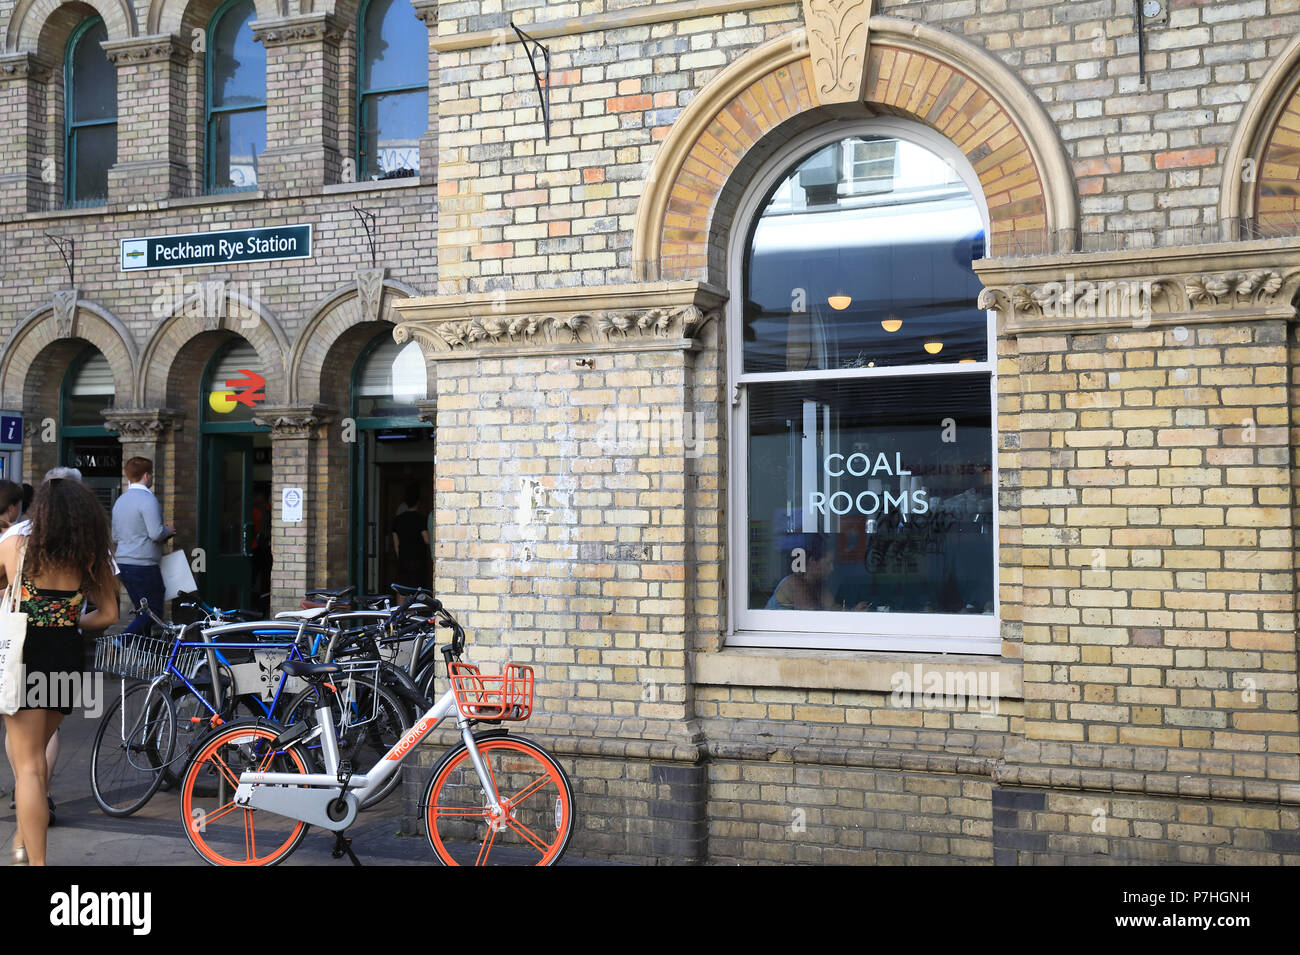 The acclaimed Coal Rooms restaurant in the old ticket office next to Peckham Rye station, in south London, UK Stock Photo